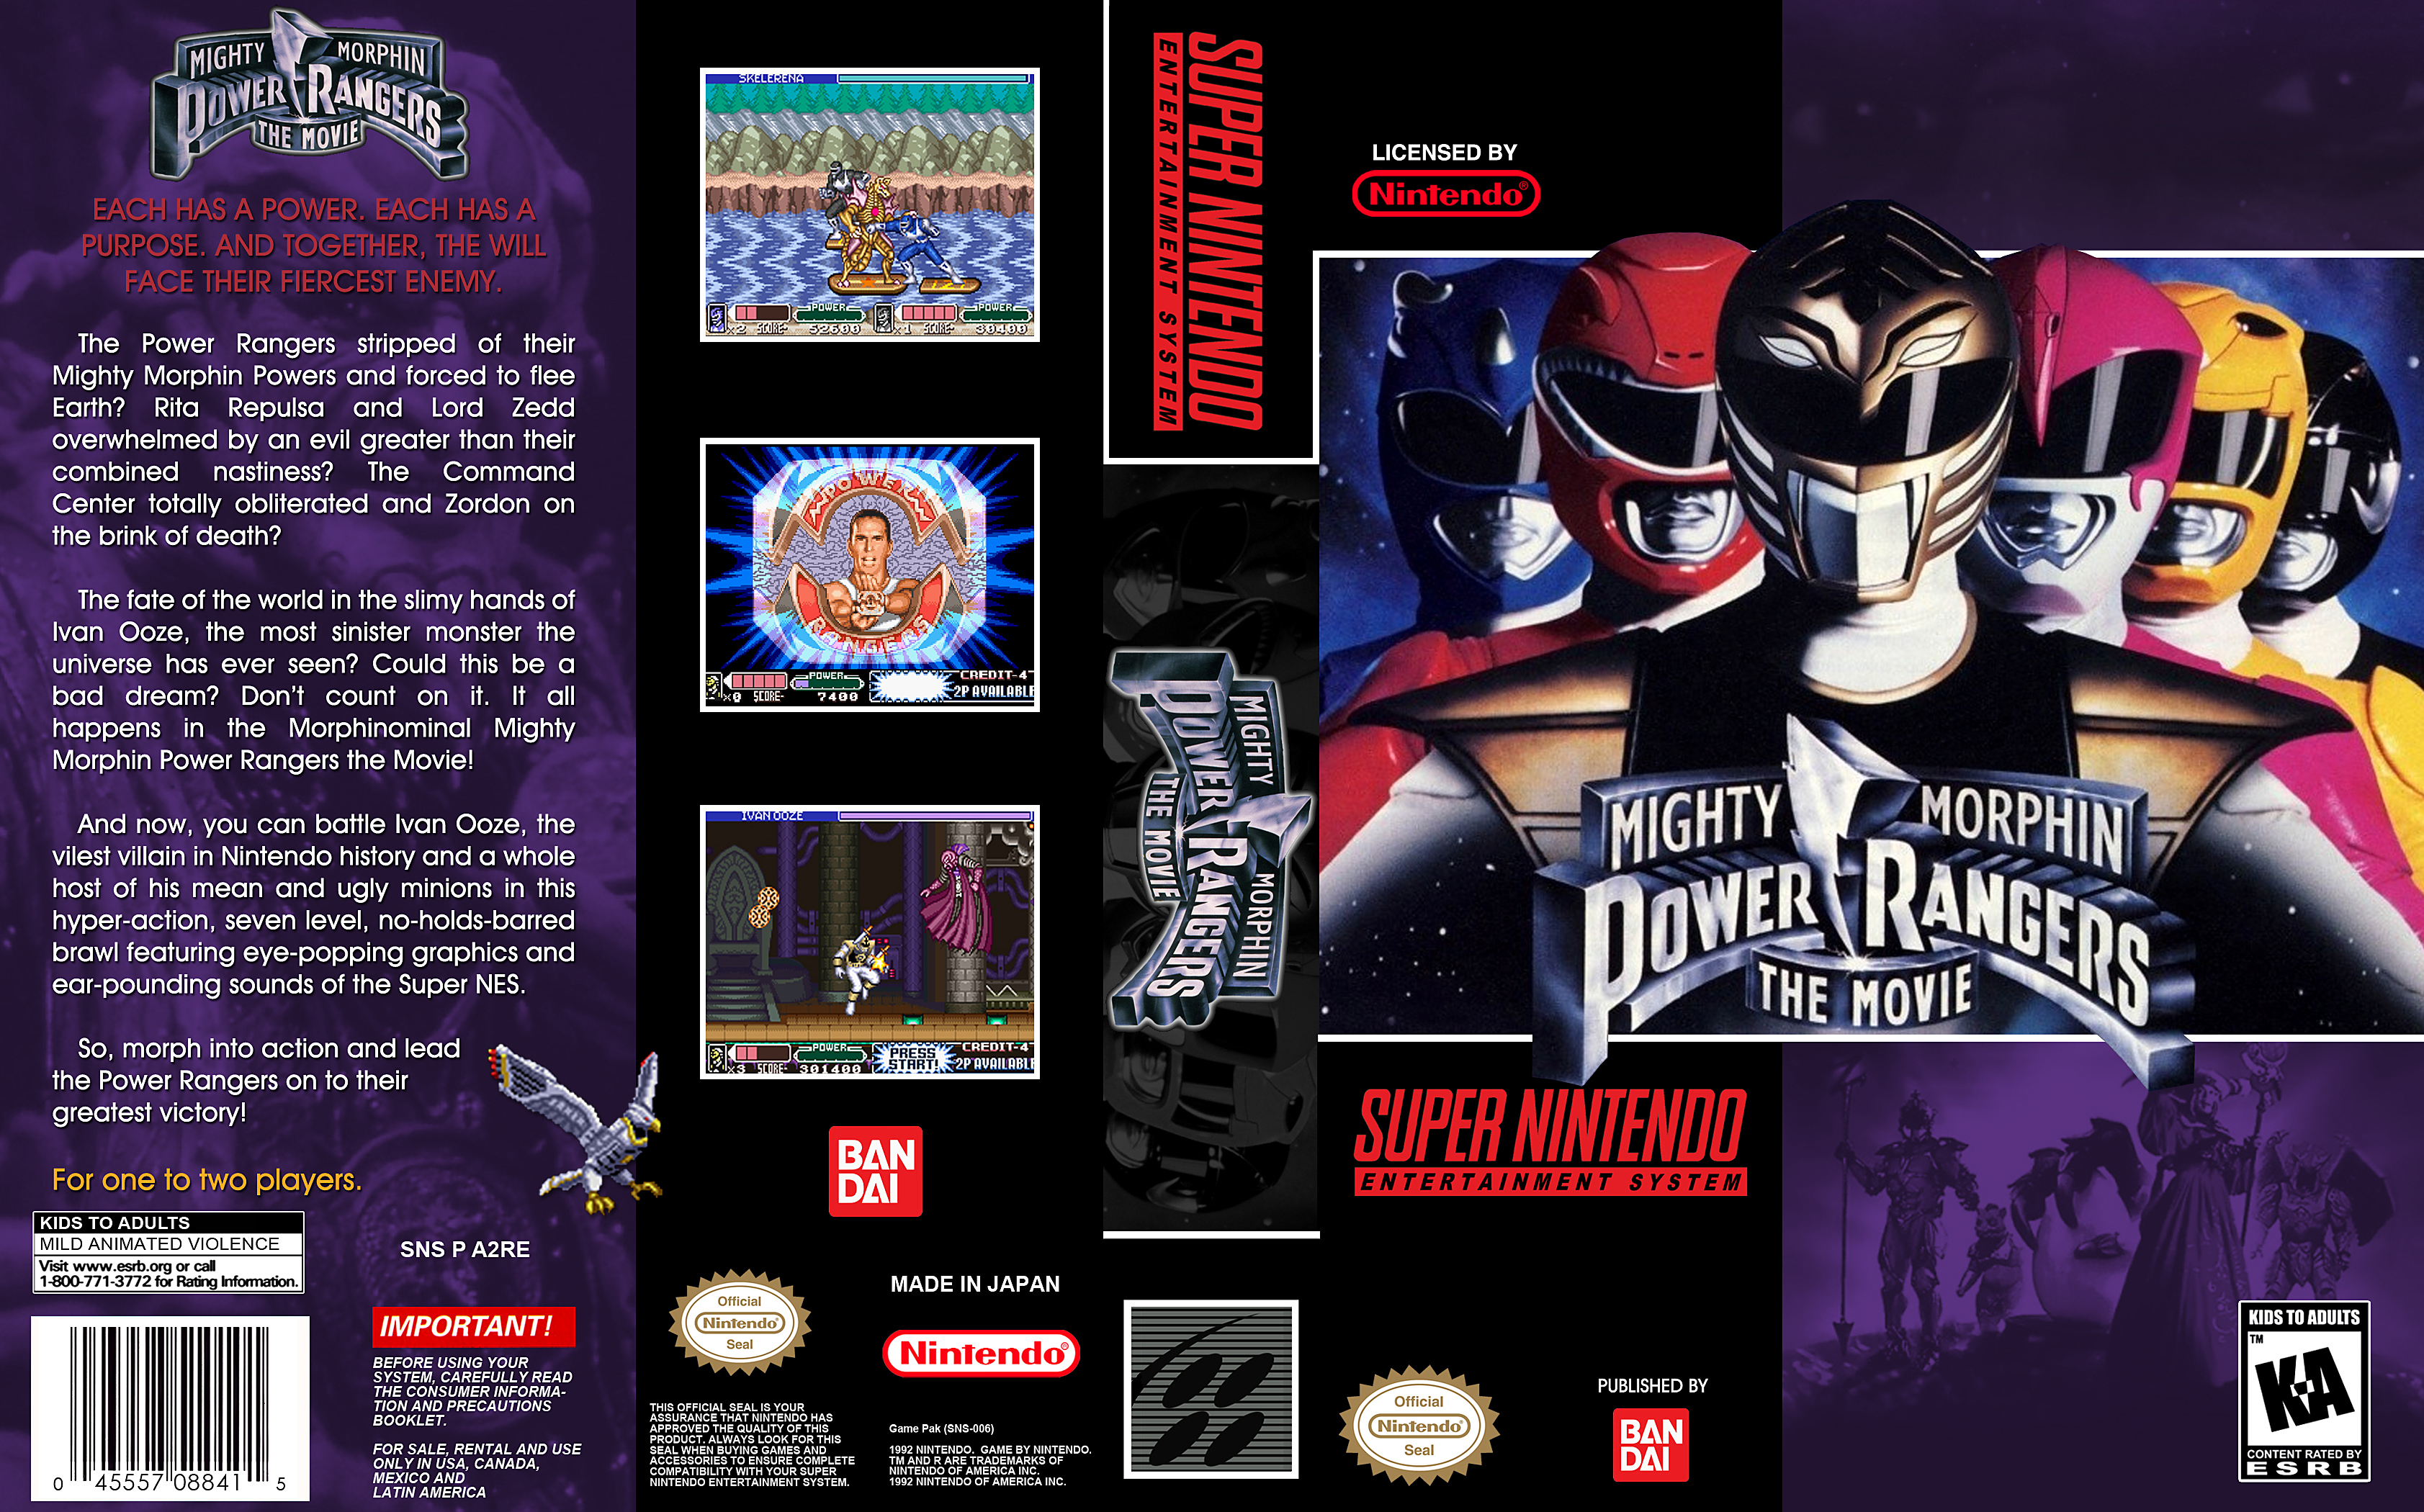 Mighty Morphin Power Rangers The Movie for Super Nintendo (AUTHENTIC) hones...